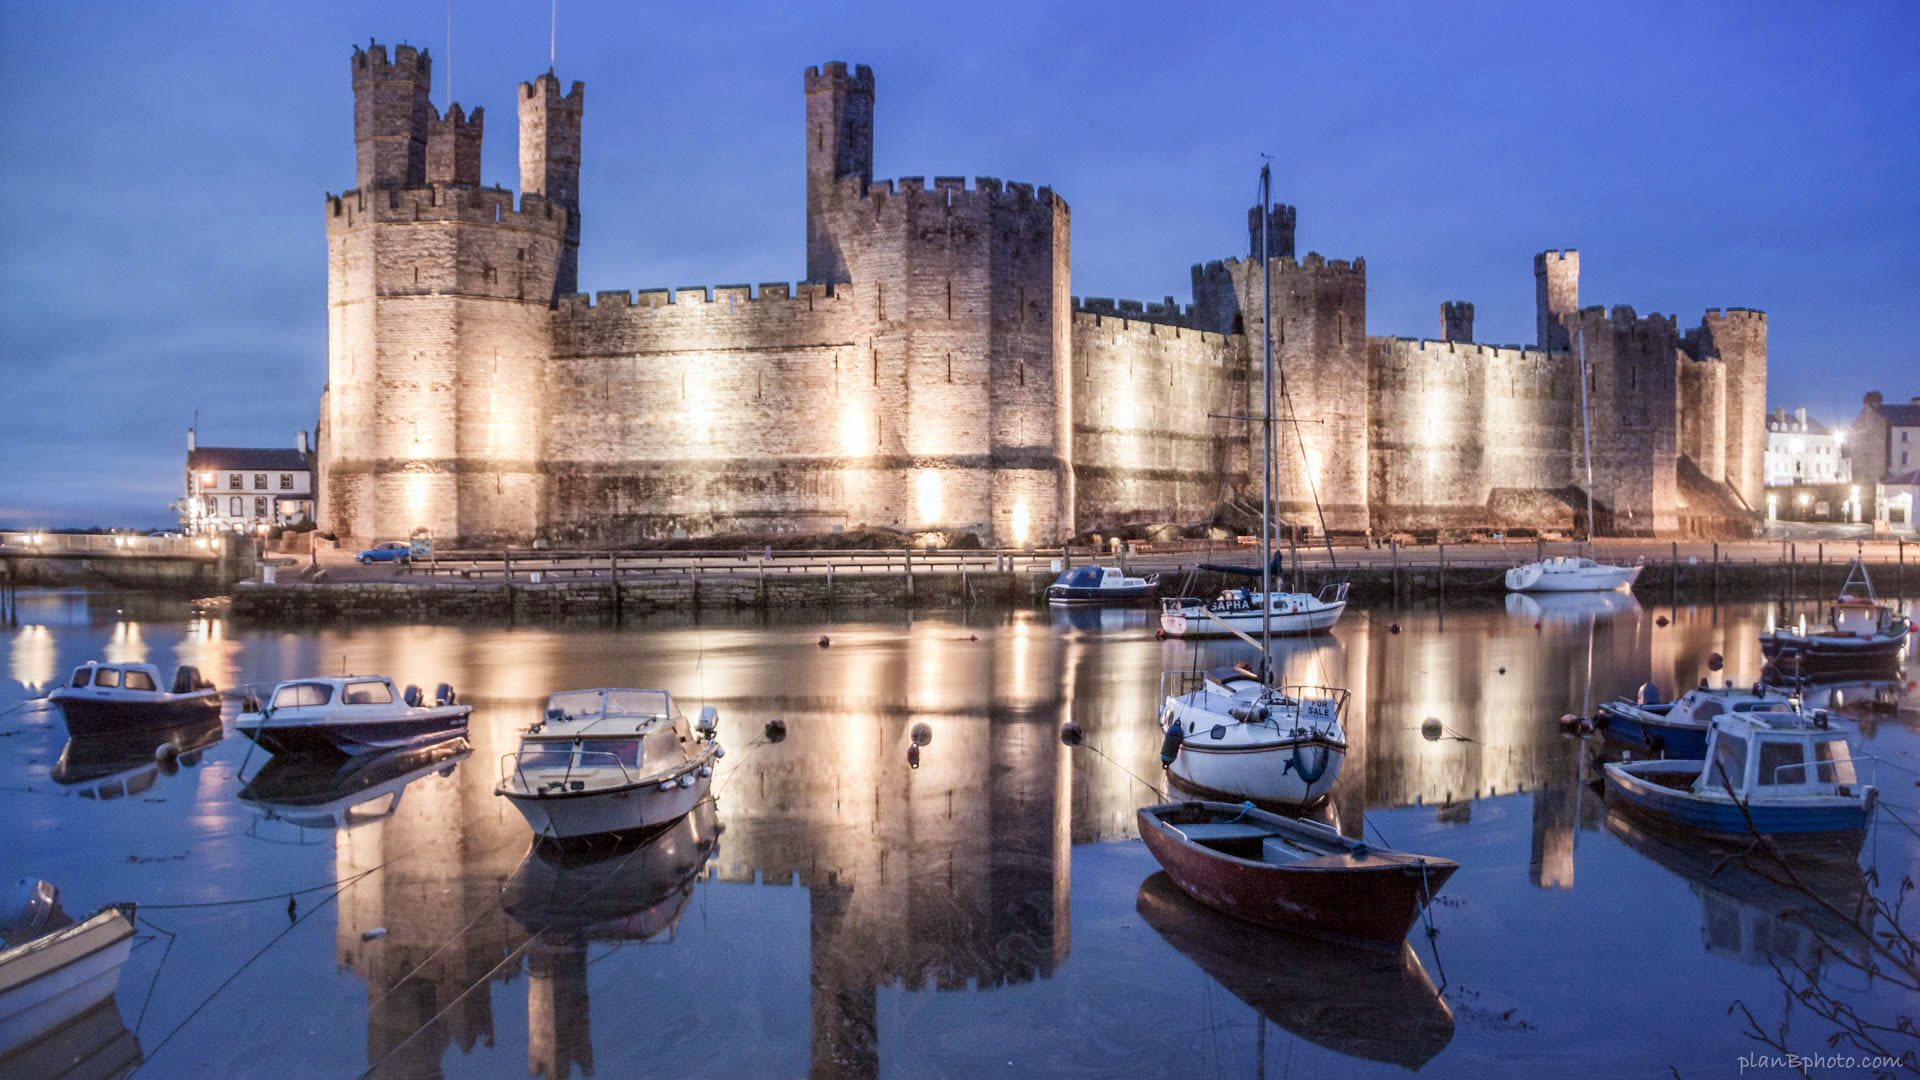 Caernarfon Castle in Wales at night with boats floating in river in front of it